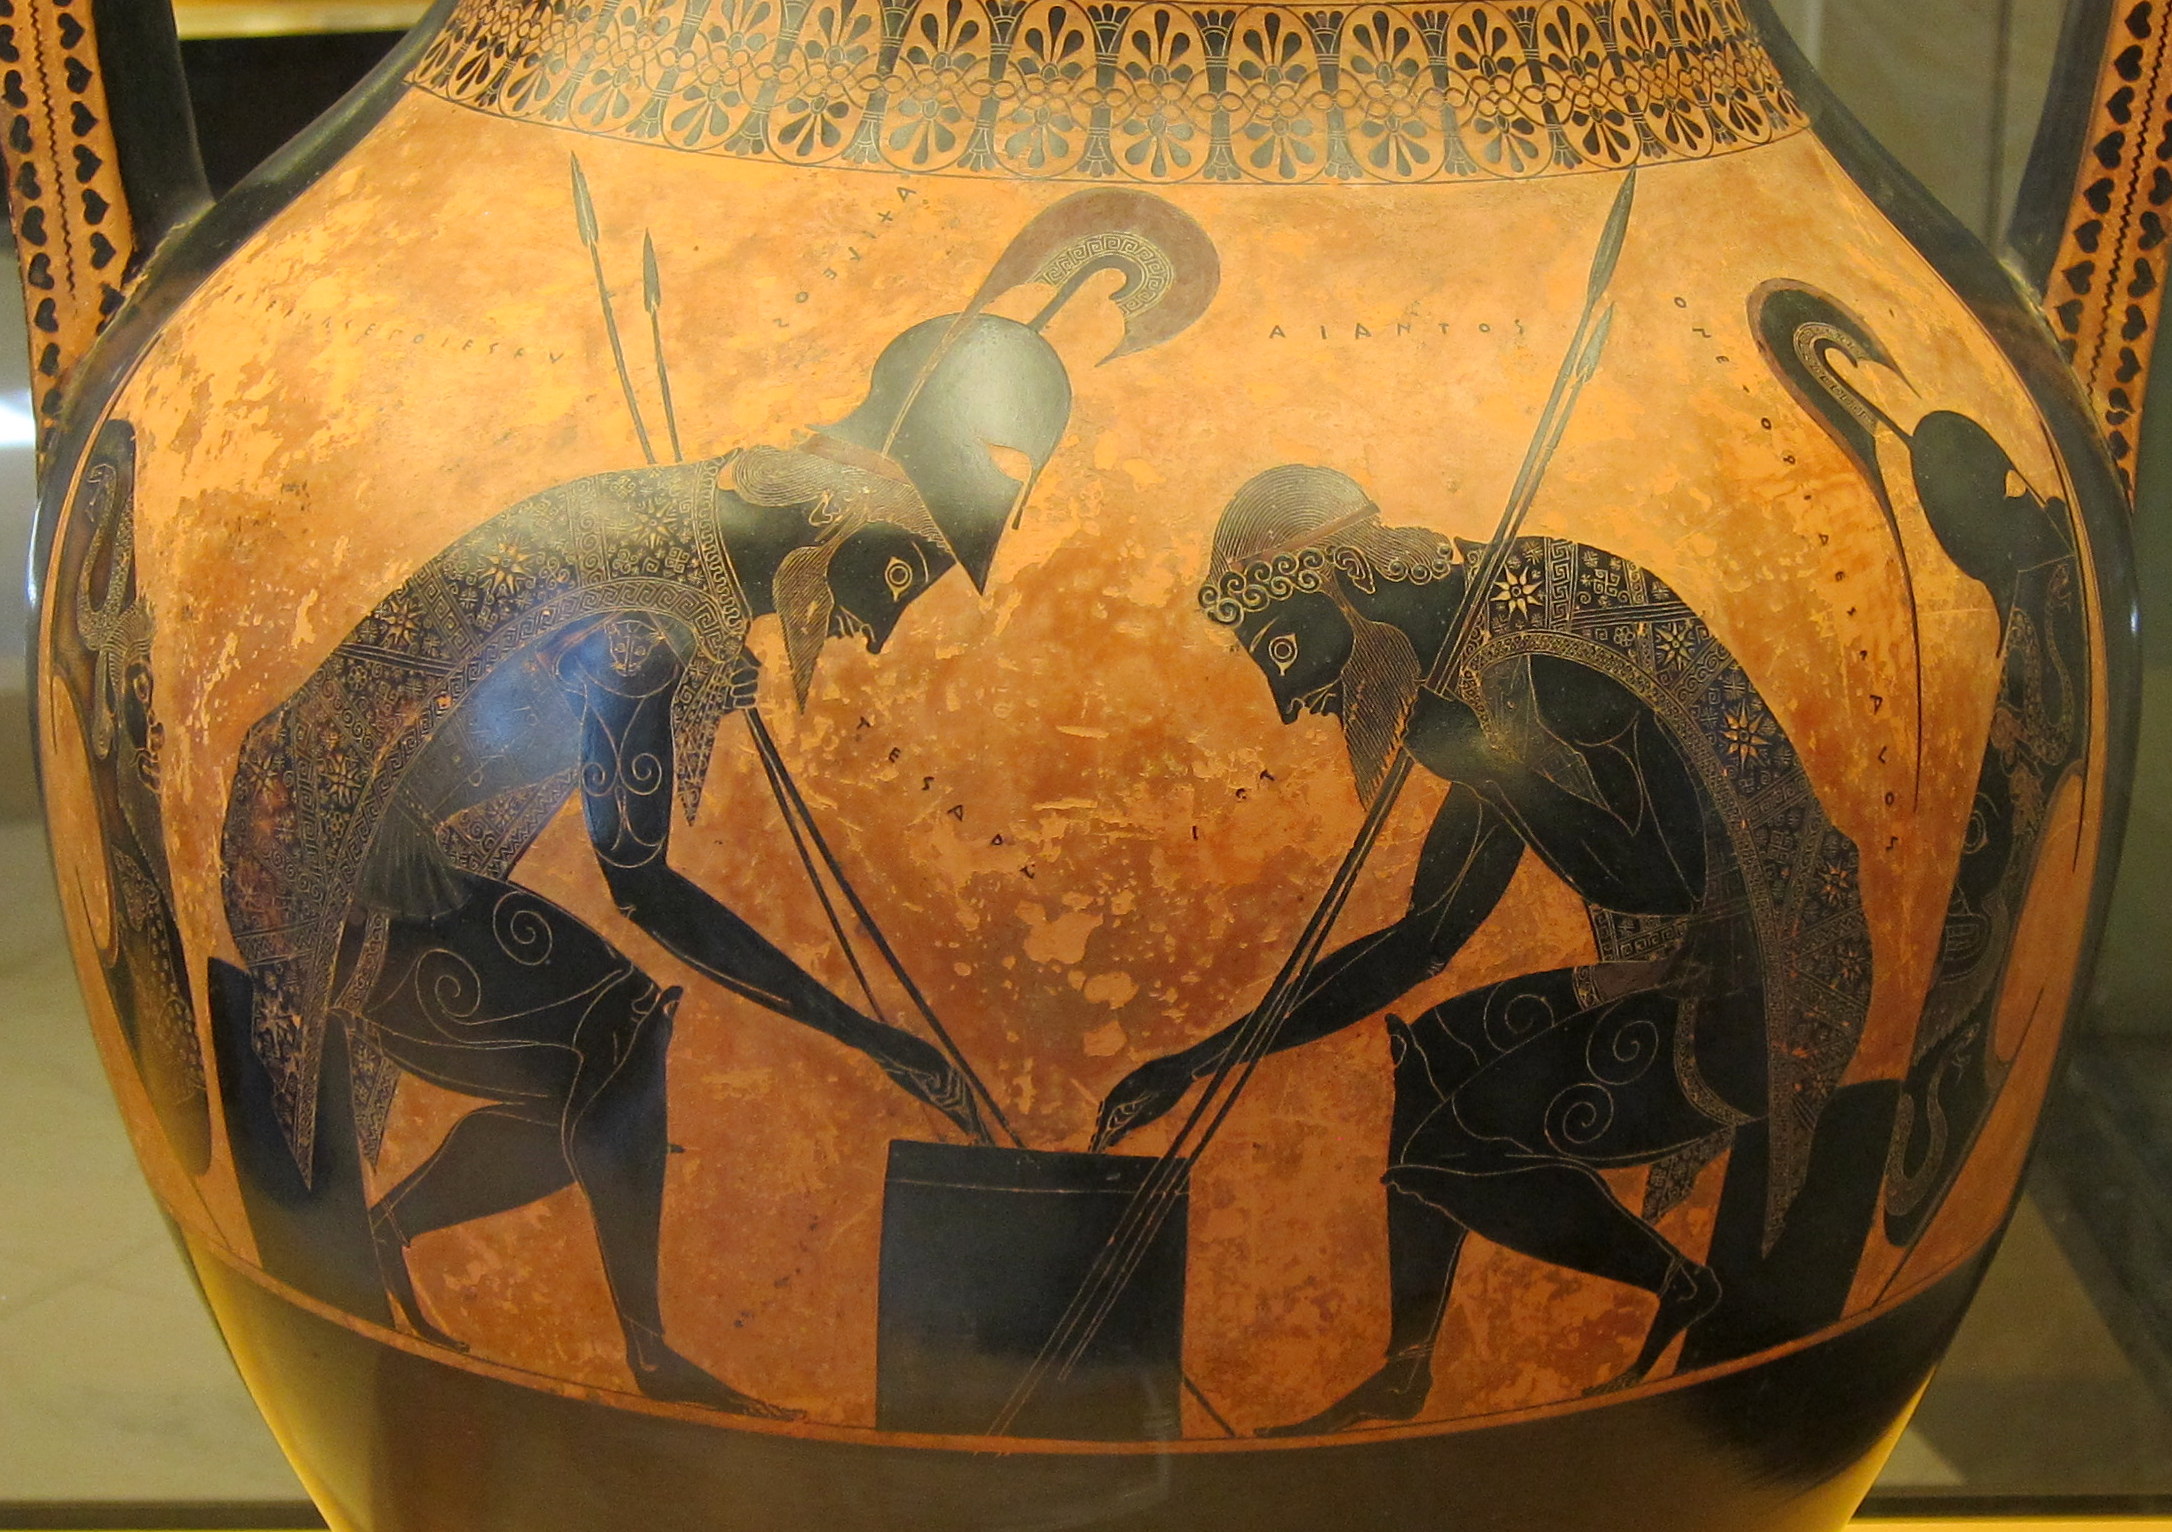  Greek vase - Achilles and Ajax playing dice. &nbsp;vase by Execias, 540 BC at the Vatican Museums. &nbsp;&nbsp; 